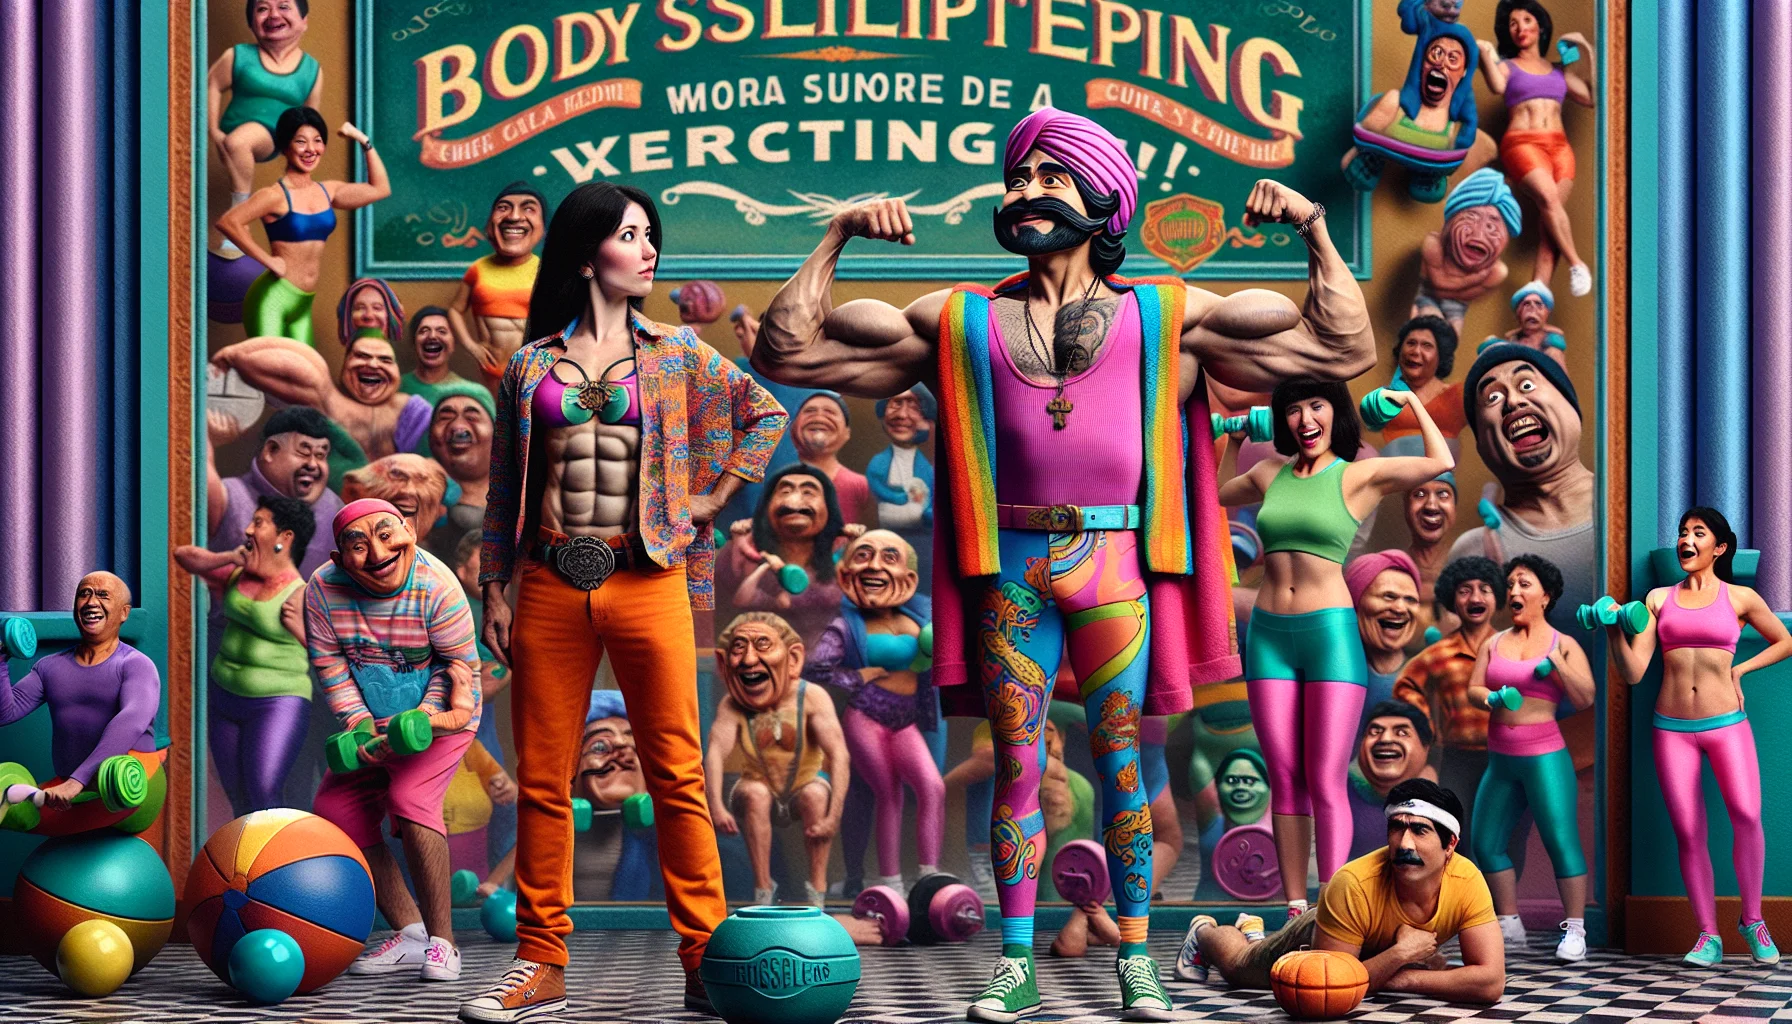 Artistically render a humorous scene focused on body sculpting. In the middle of the composition, place a tall, muscular South Asian man wearing vibrant workout gear, confidently showing off his chiseled abs. Close by, a petite Hispanic woman wearing a colourful exercise outfit is, with exaggerated determination, attempting a bicep curl with an extremely large weight. An inscription in Spanish, with a playful and encouraging tone, invites viewers to join the exciting world of exercising. Populate the background with an array of goofy and diverse fitness enthusiasts of varying ages and descents, all dressed in bright workout clothes, immersed in their unique, humorous exercise routines.